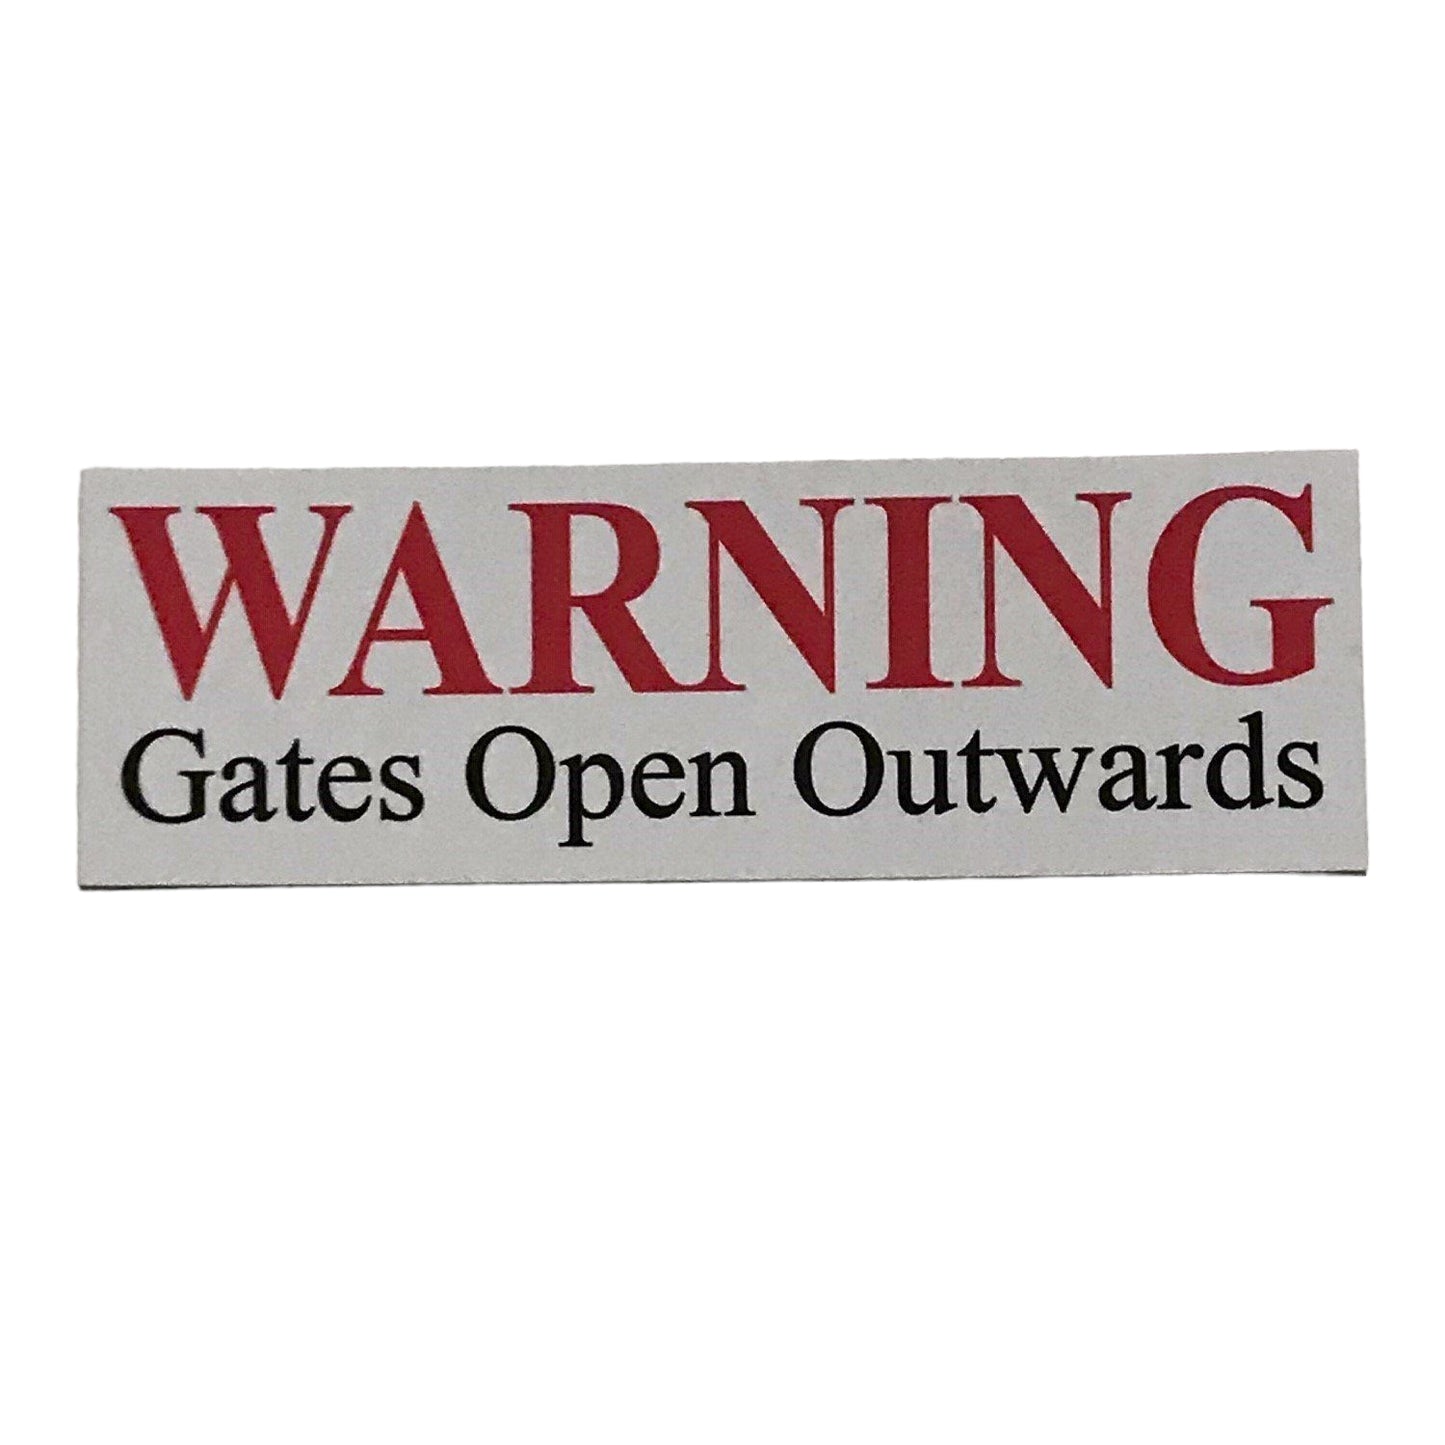 Warning Gates Open Outwards Gate Sign - The Renmy Store Homewares & Gifts 